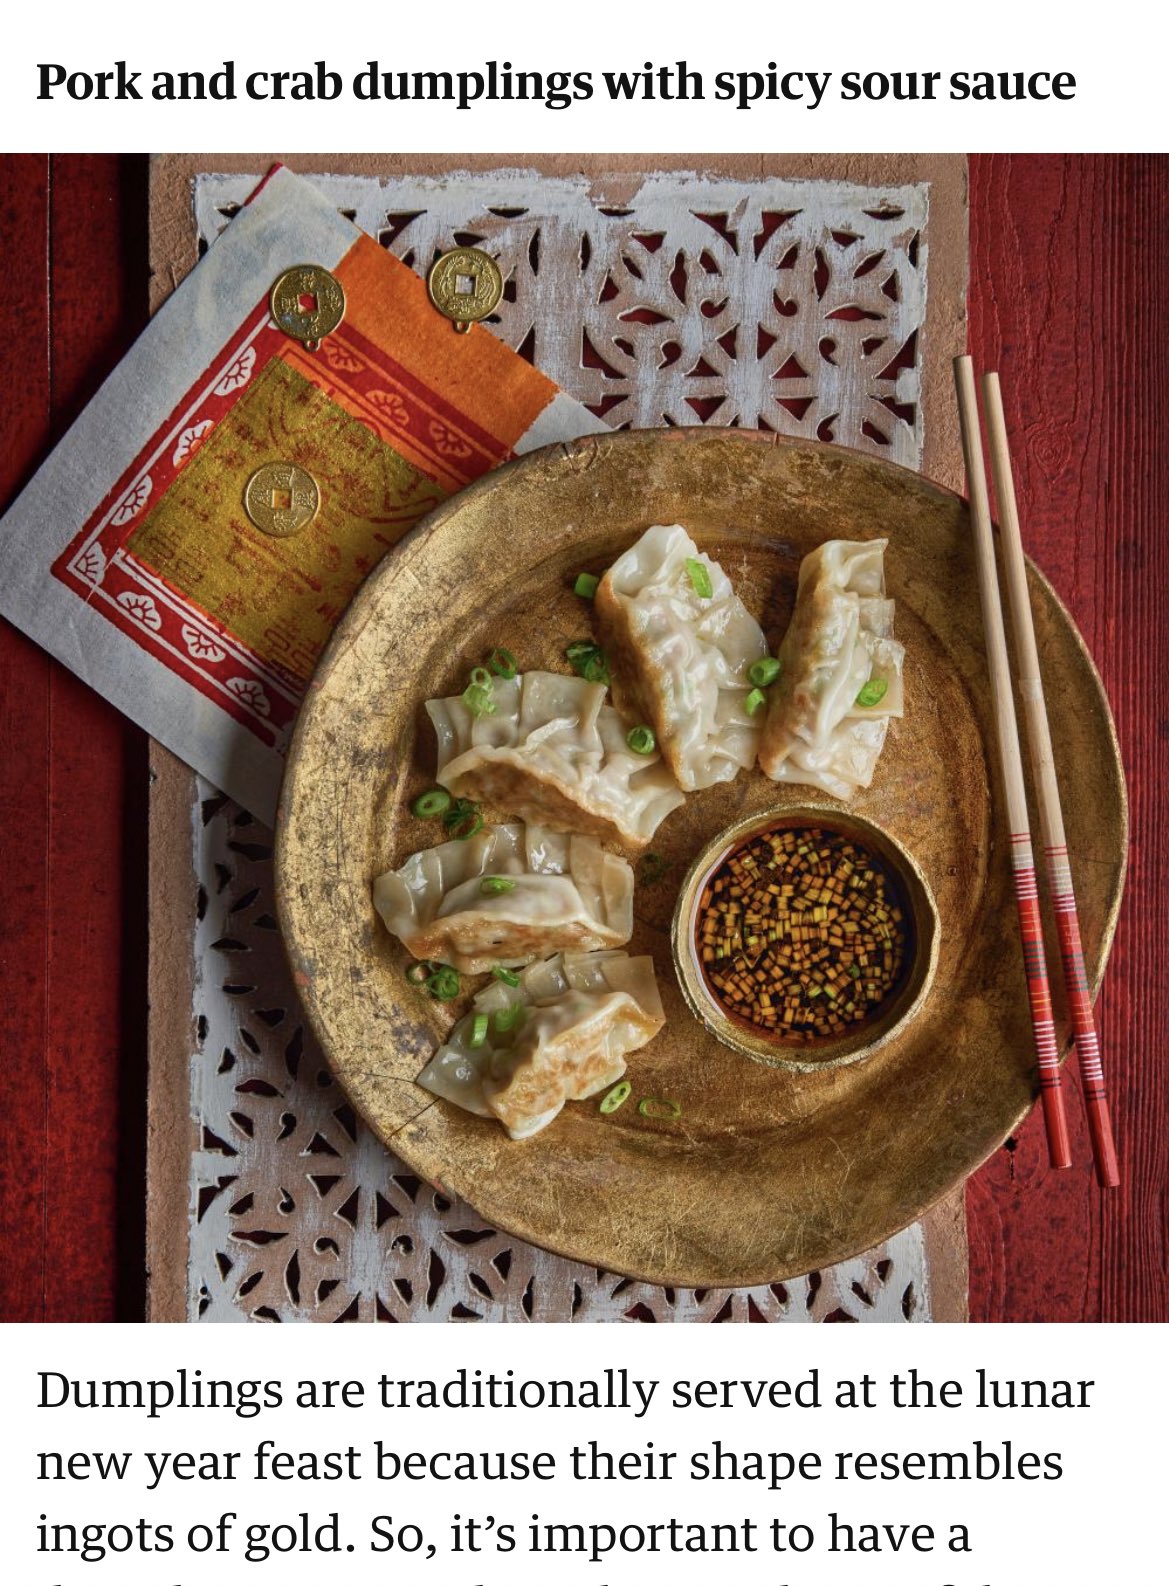 Pork and crab dumplings with spicy sour sauce